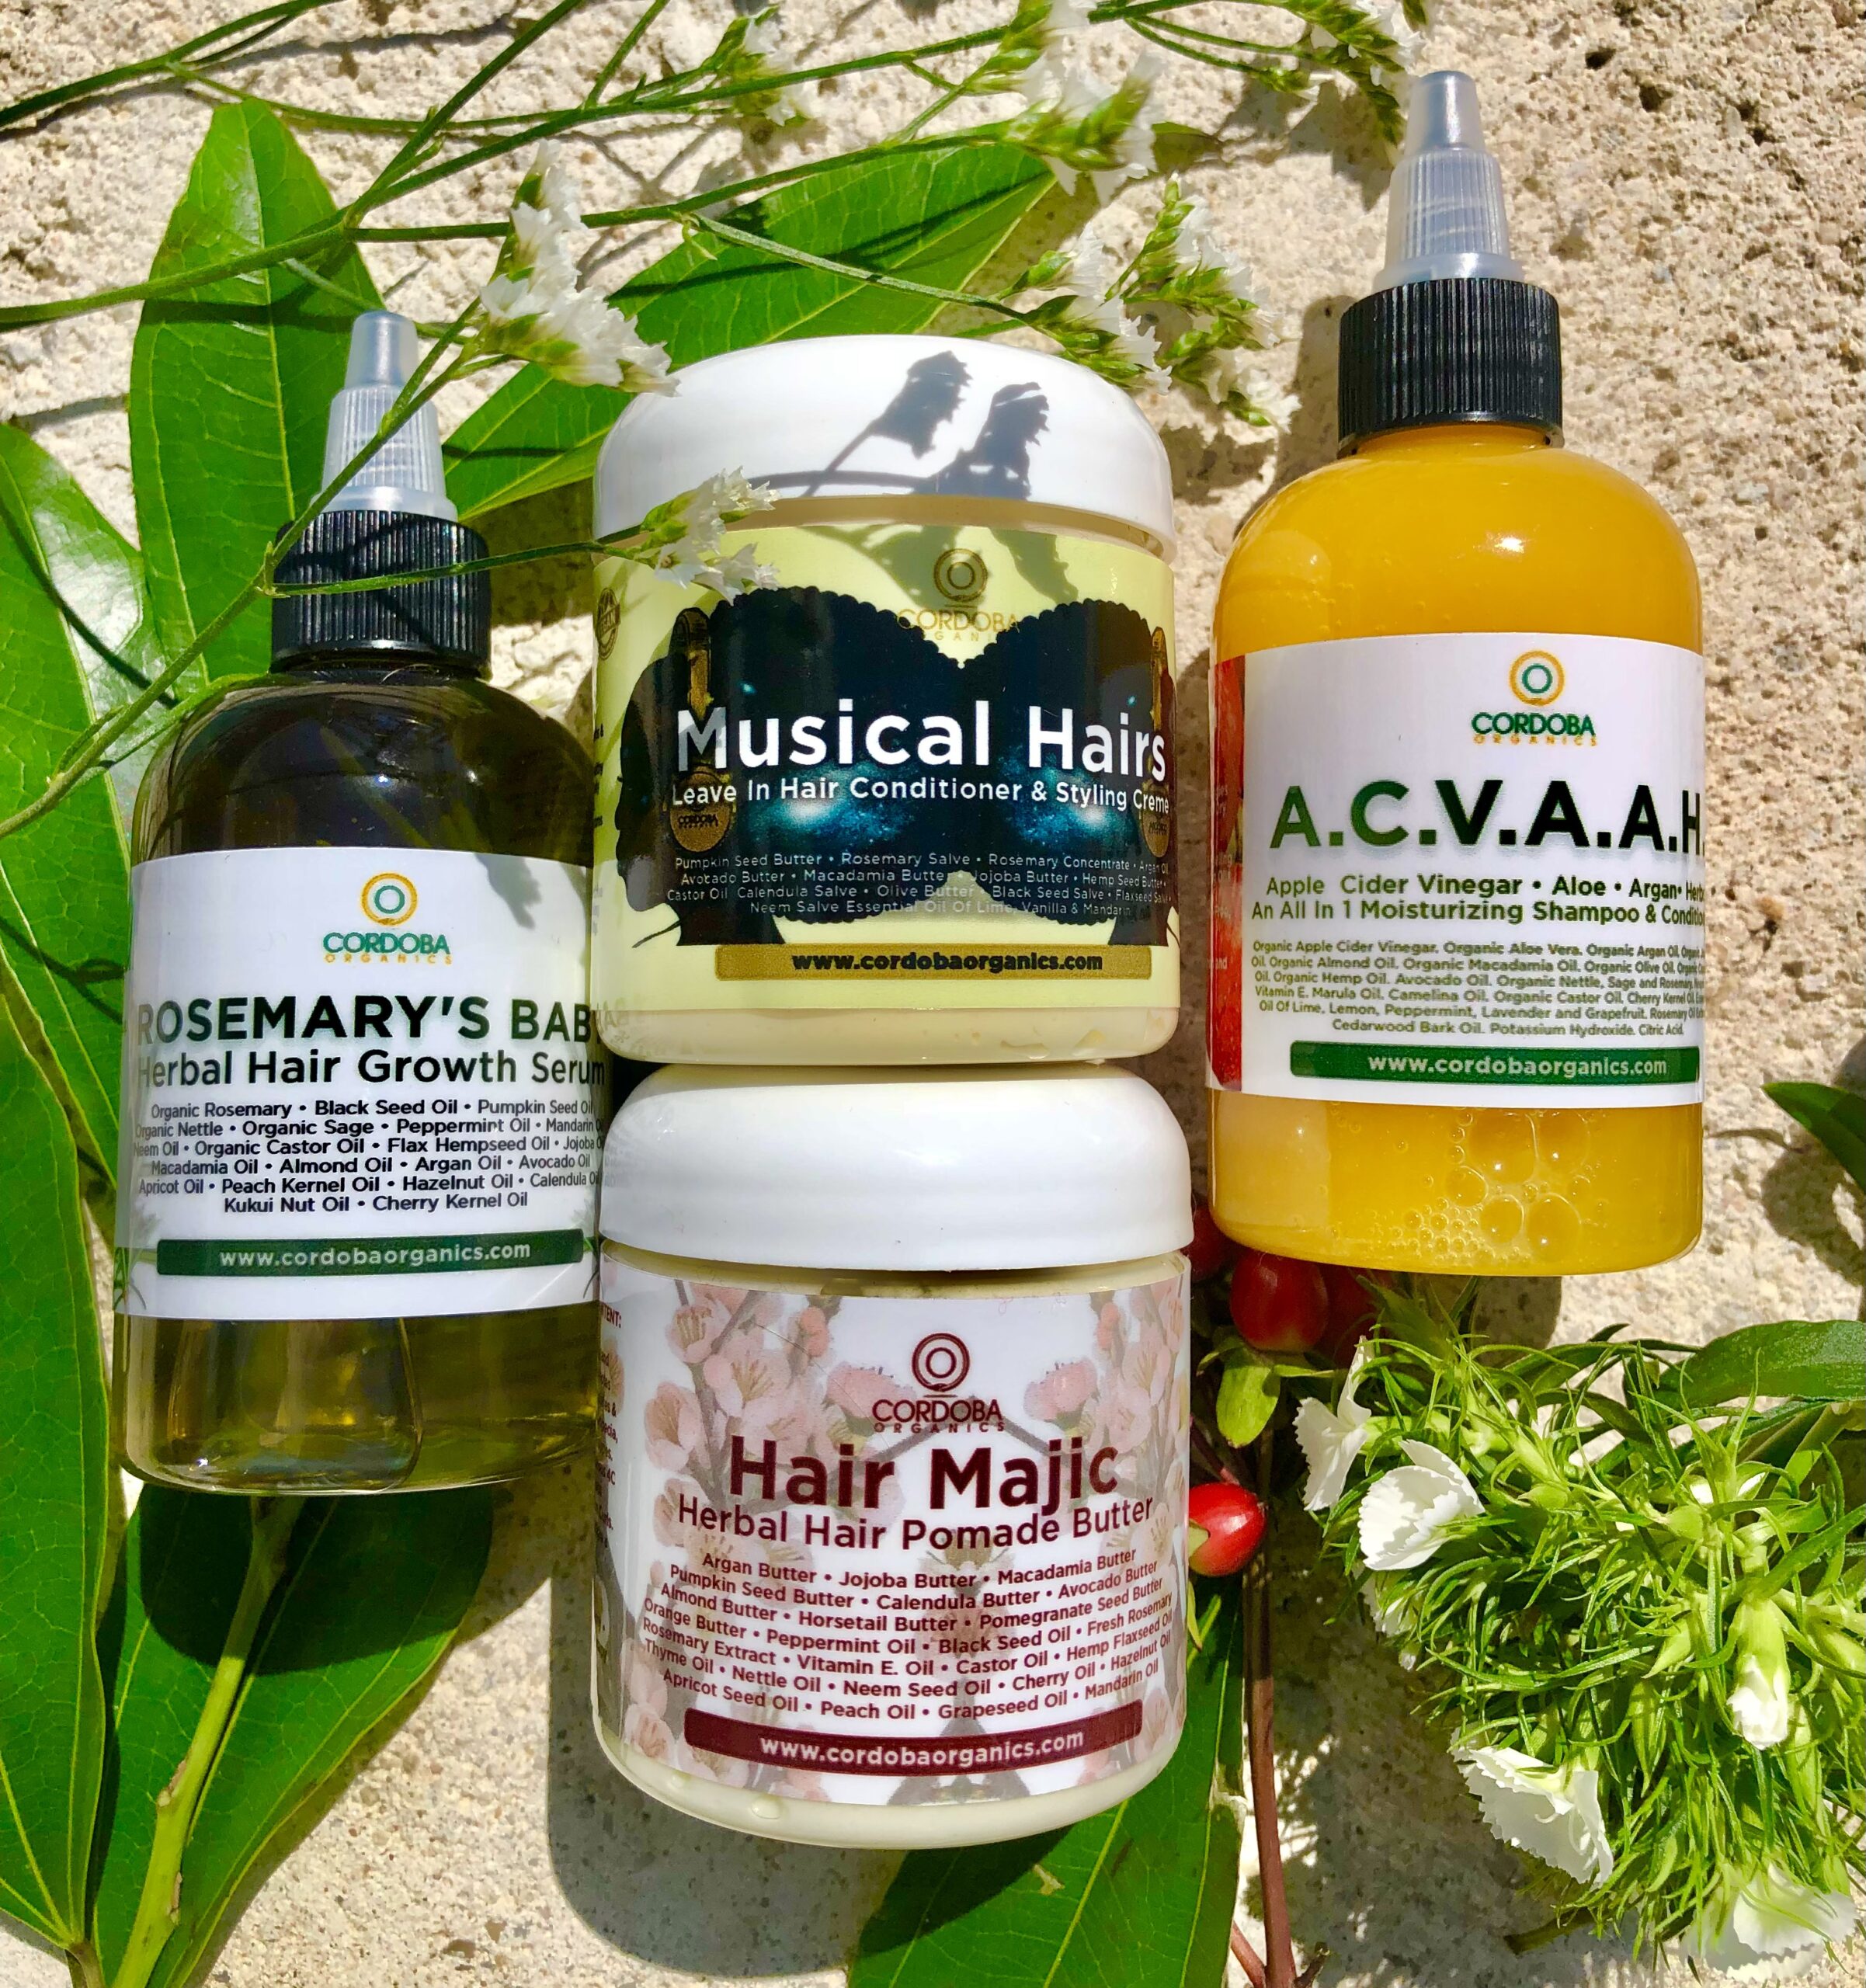 Hair Growth First Aid Kit: Musical Hairs, A.C.V.A.A.H, Rosemary's Baby &  Hair Majic. Receive ALL 4 products and begin your hair growth journey today.